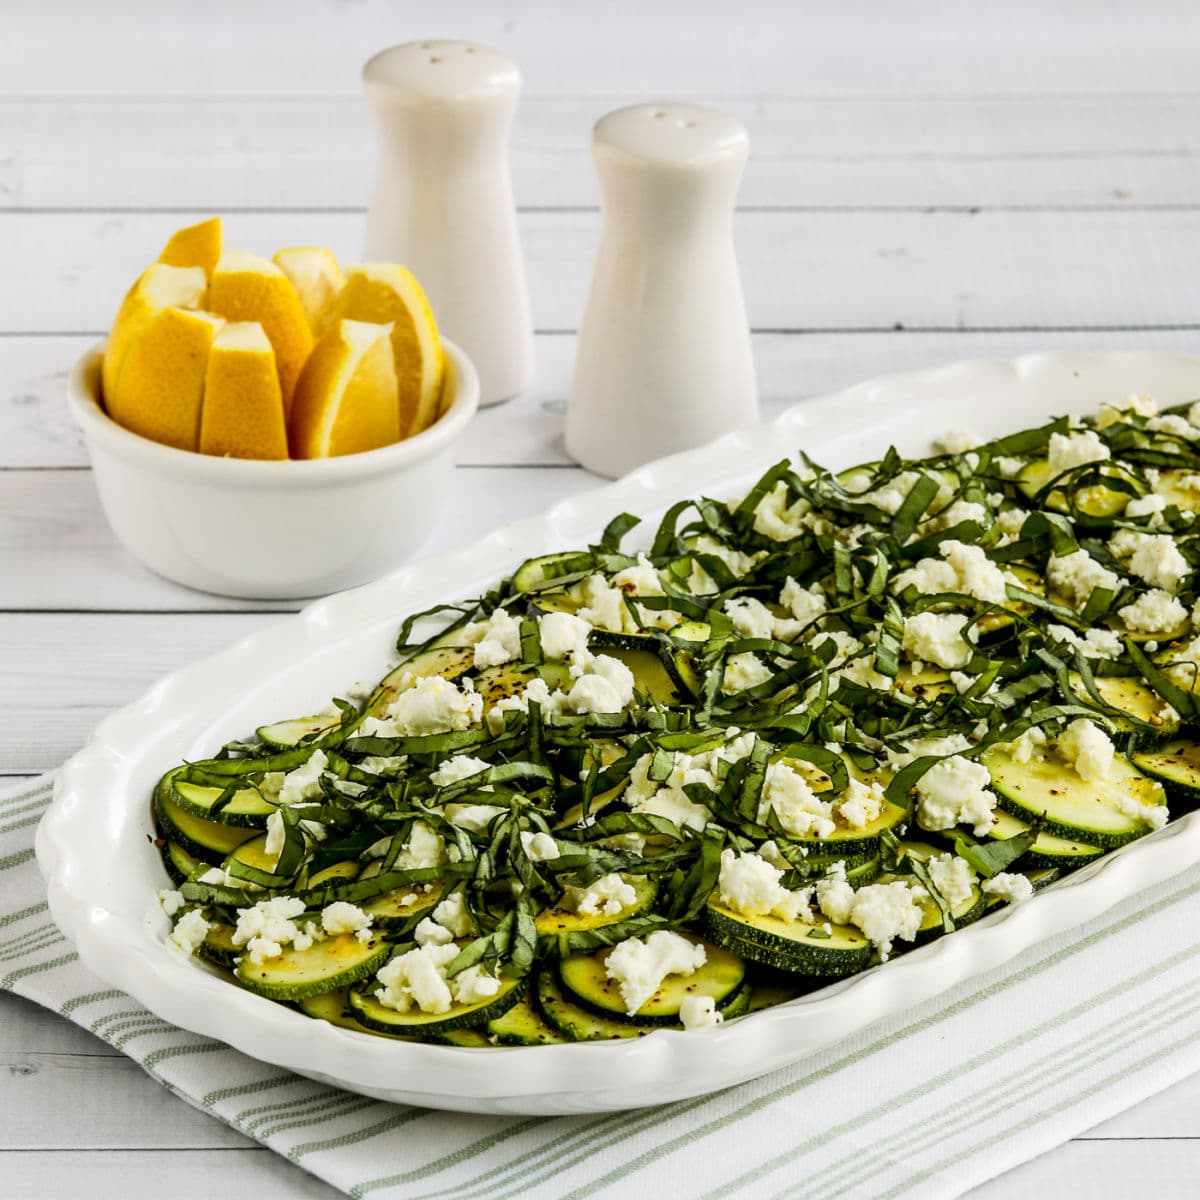 Square image of Zucchini Carpaccio on serving dish with lemon in background.